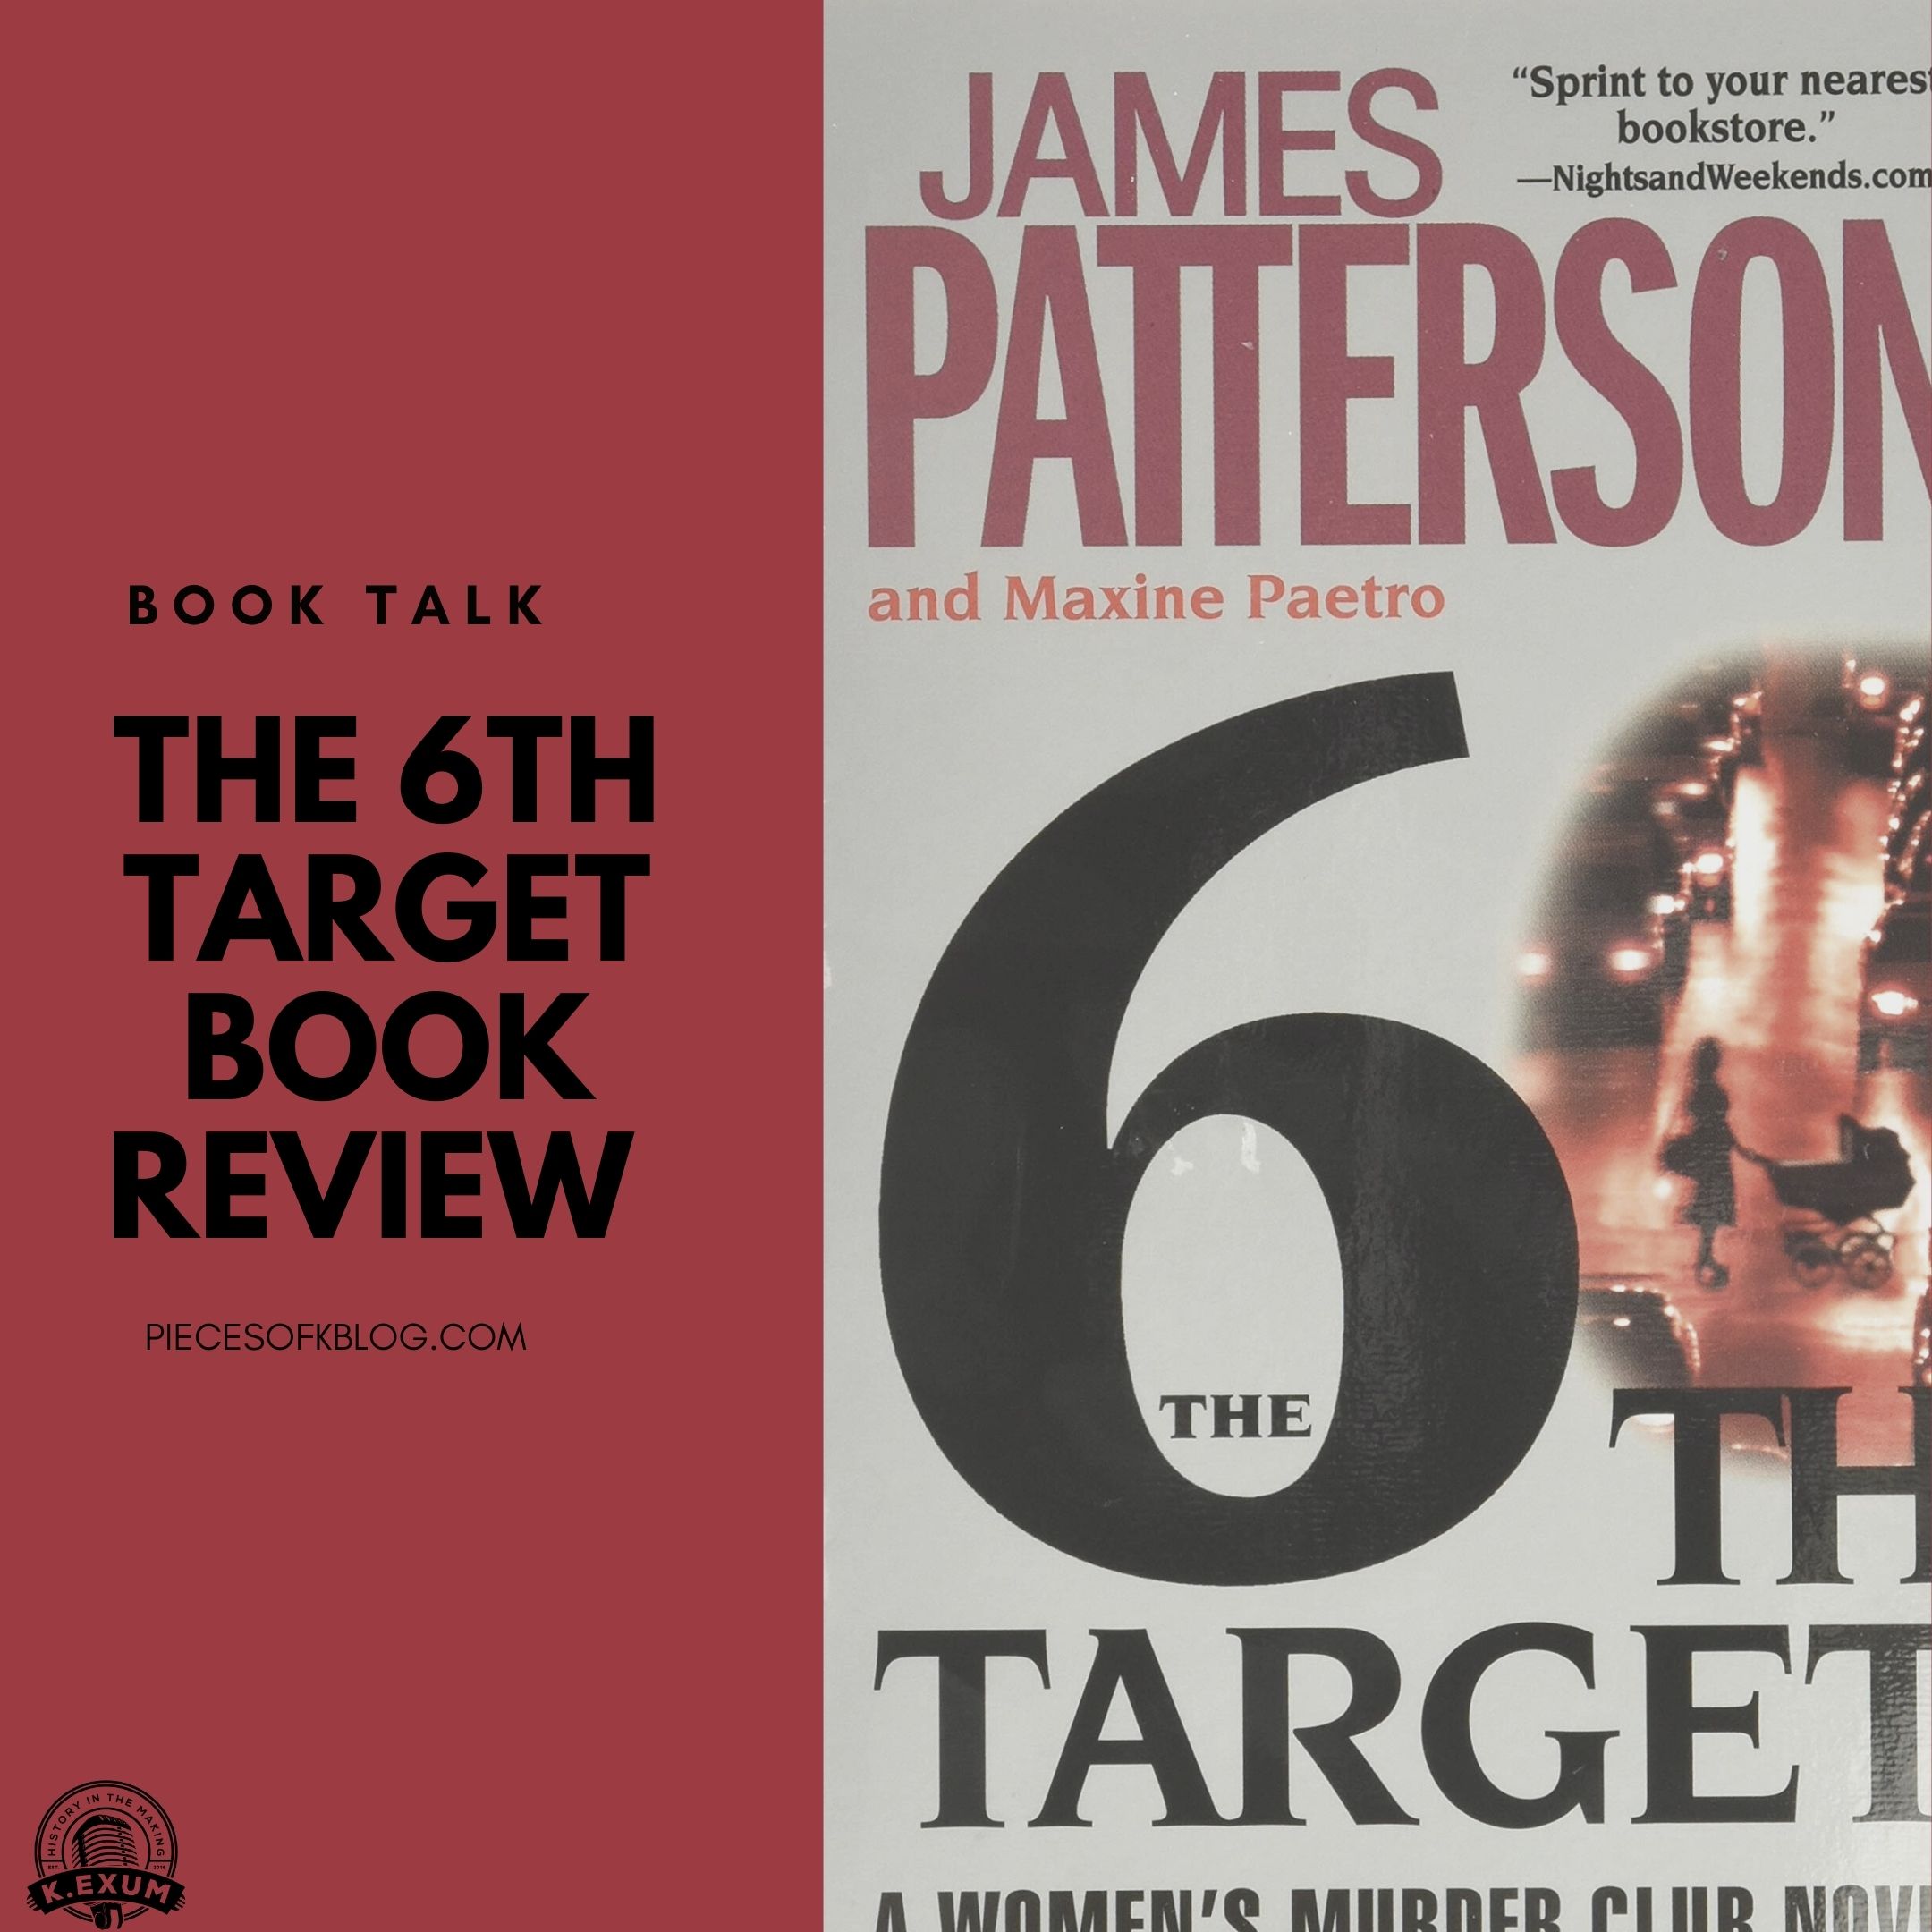 The 6th Target Book Review